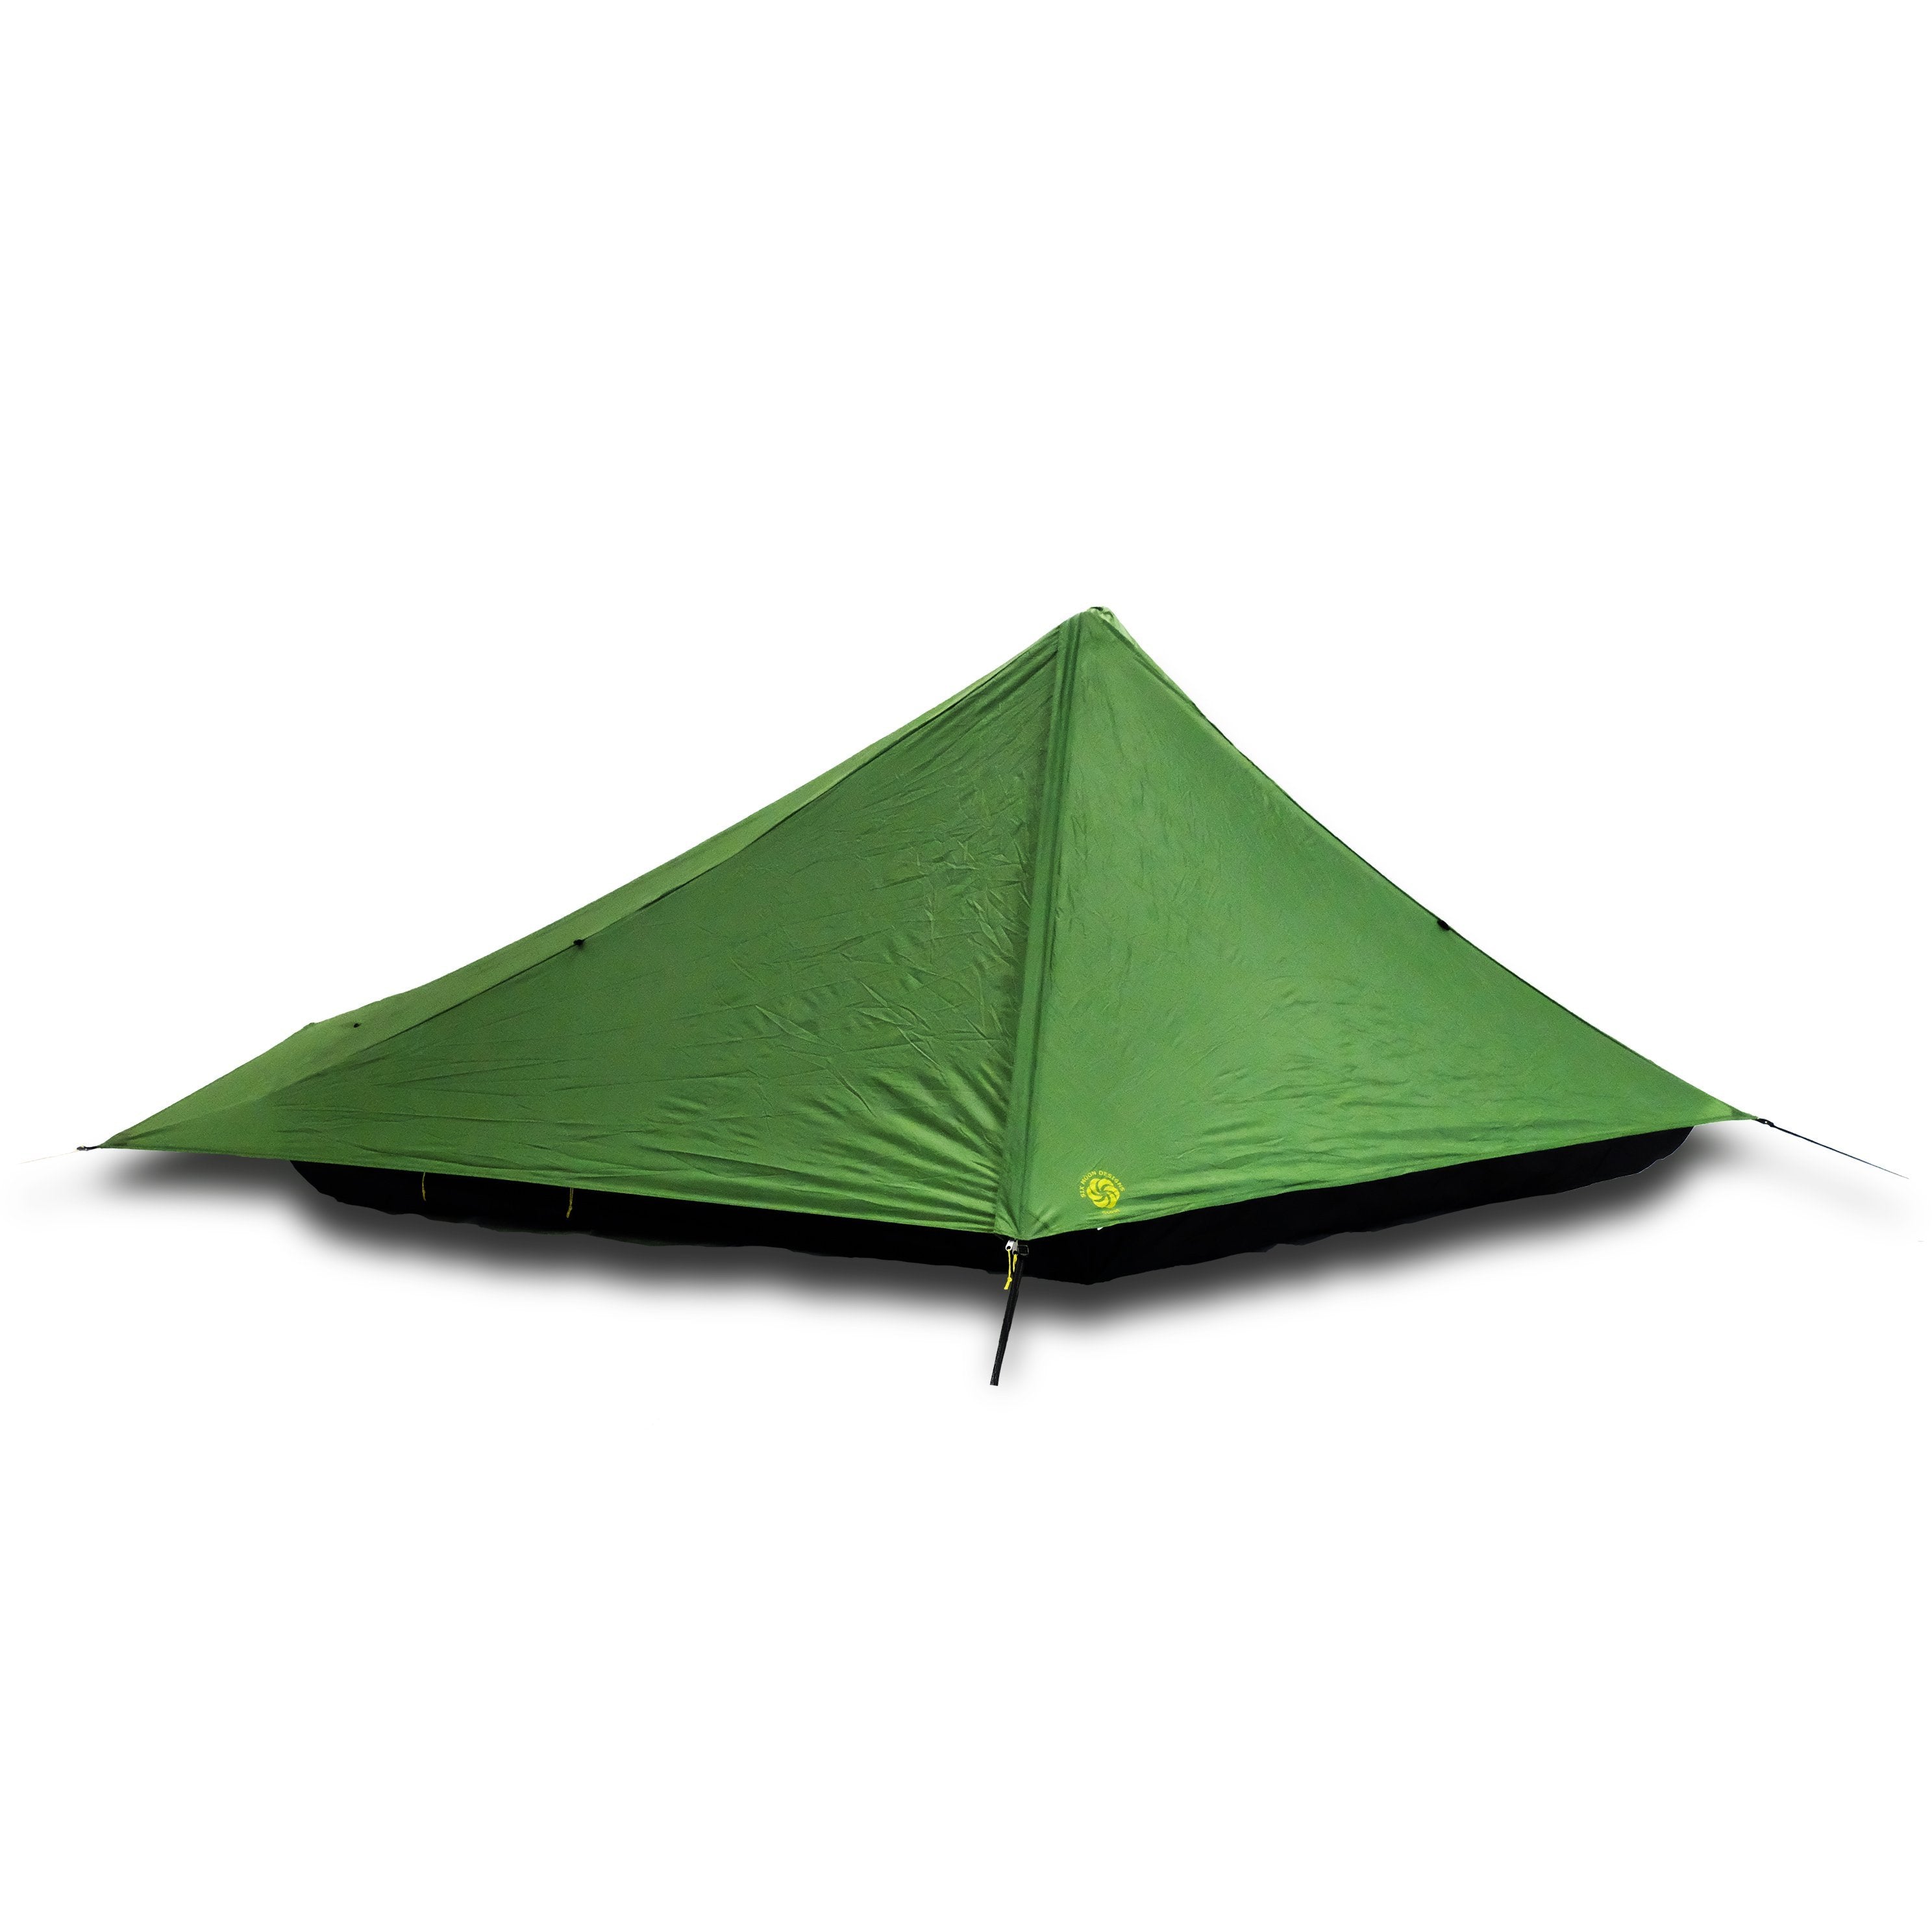 Skyscape Scout Ultralight 1 Person Tent with doors closed - side